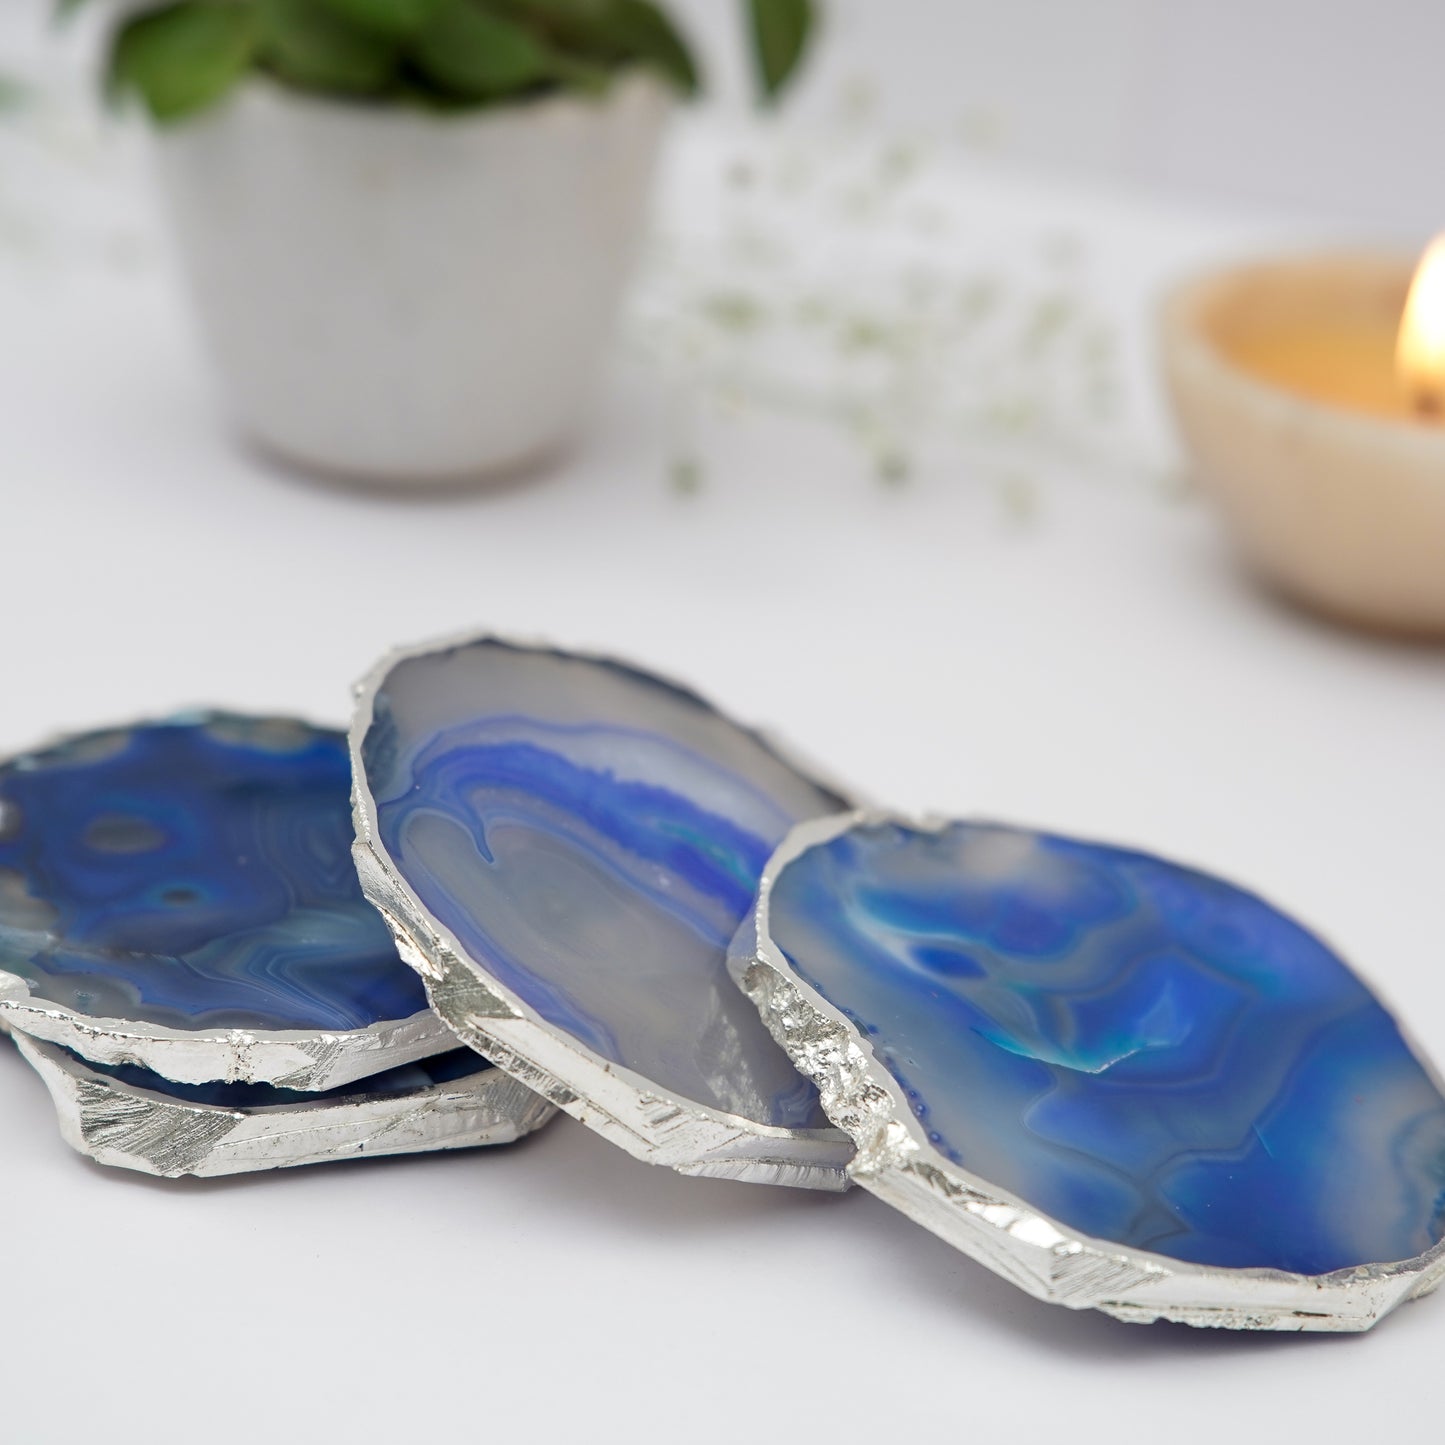 Brazilian Agate Stone Silver Plated Coaster Beautiful Coaster Fit for Tea Cups Coffee Mugs and Glasses Perfect Table Accessories Tableware Set of 4- Blue